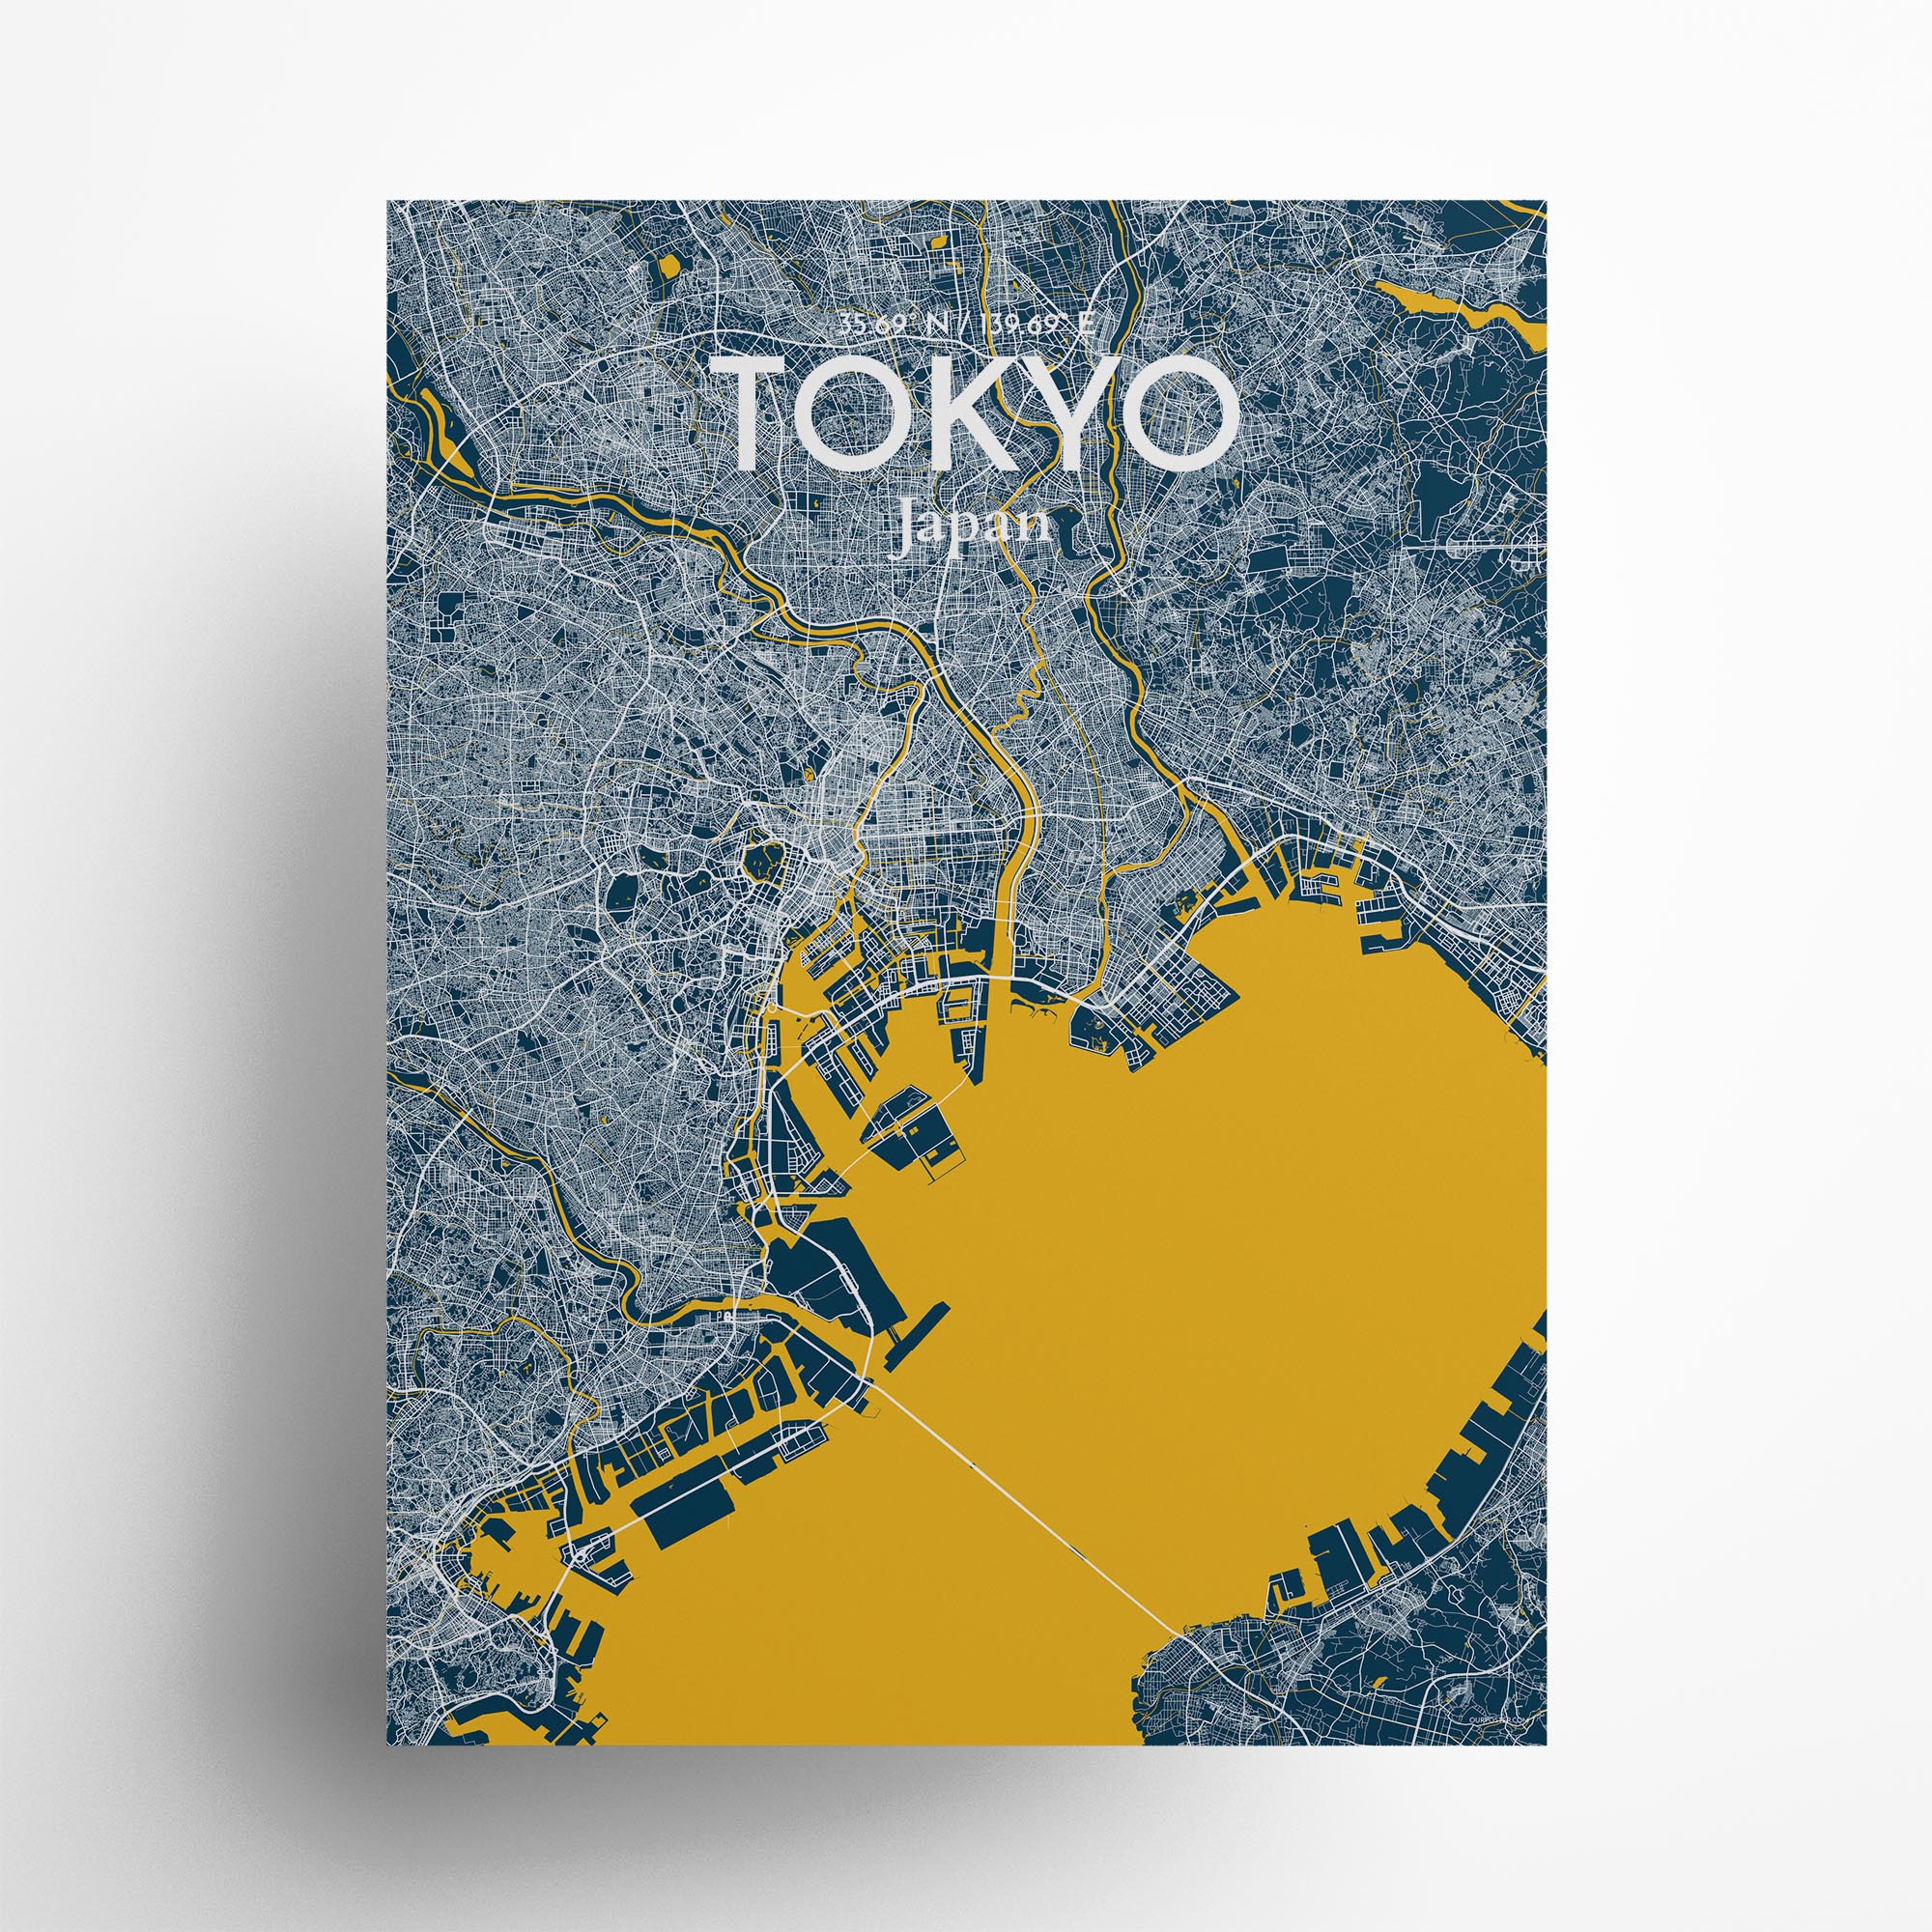 Tokyo city map poster in Amuse of size 18" x 24"